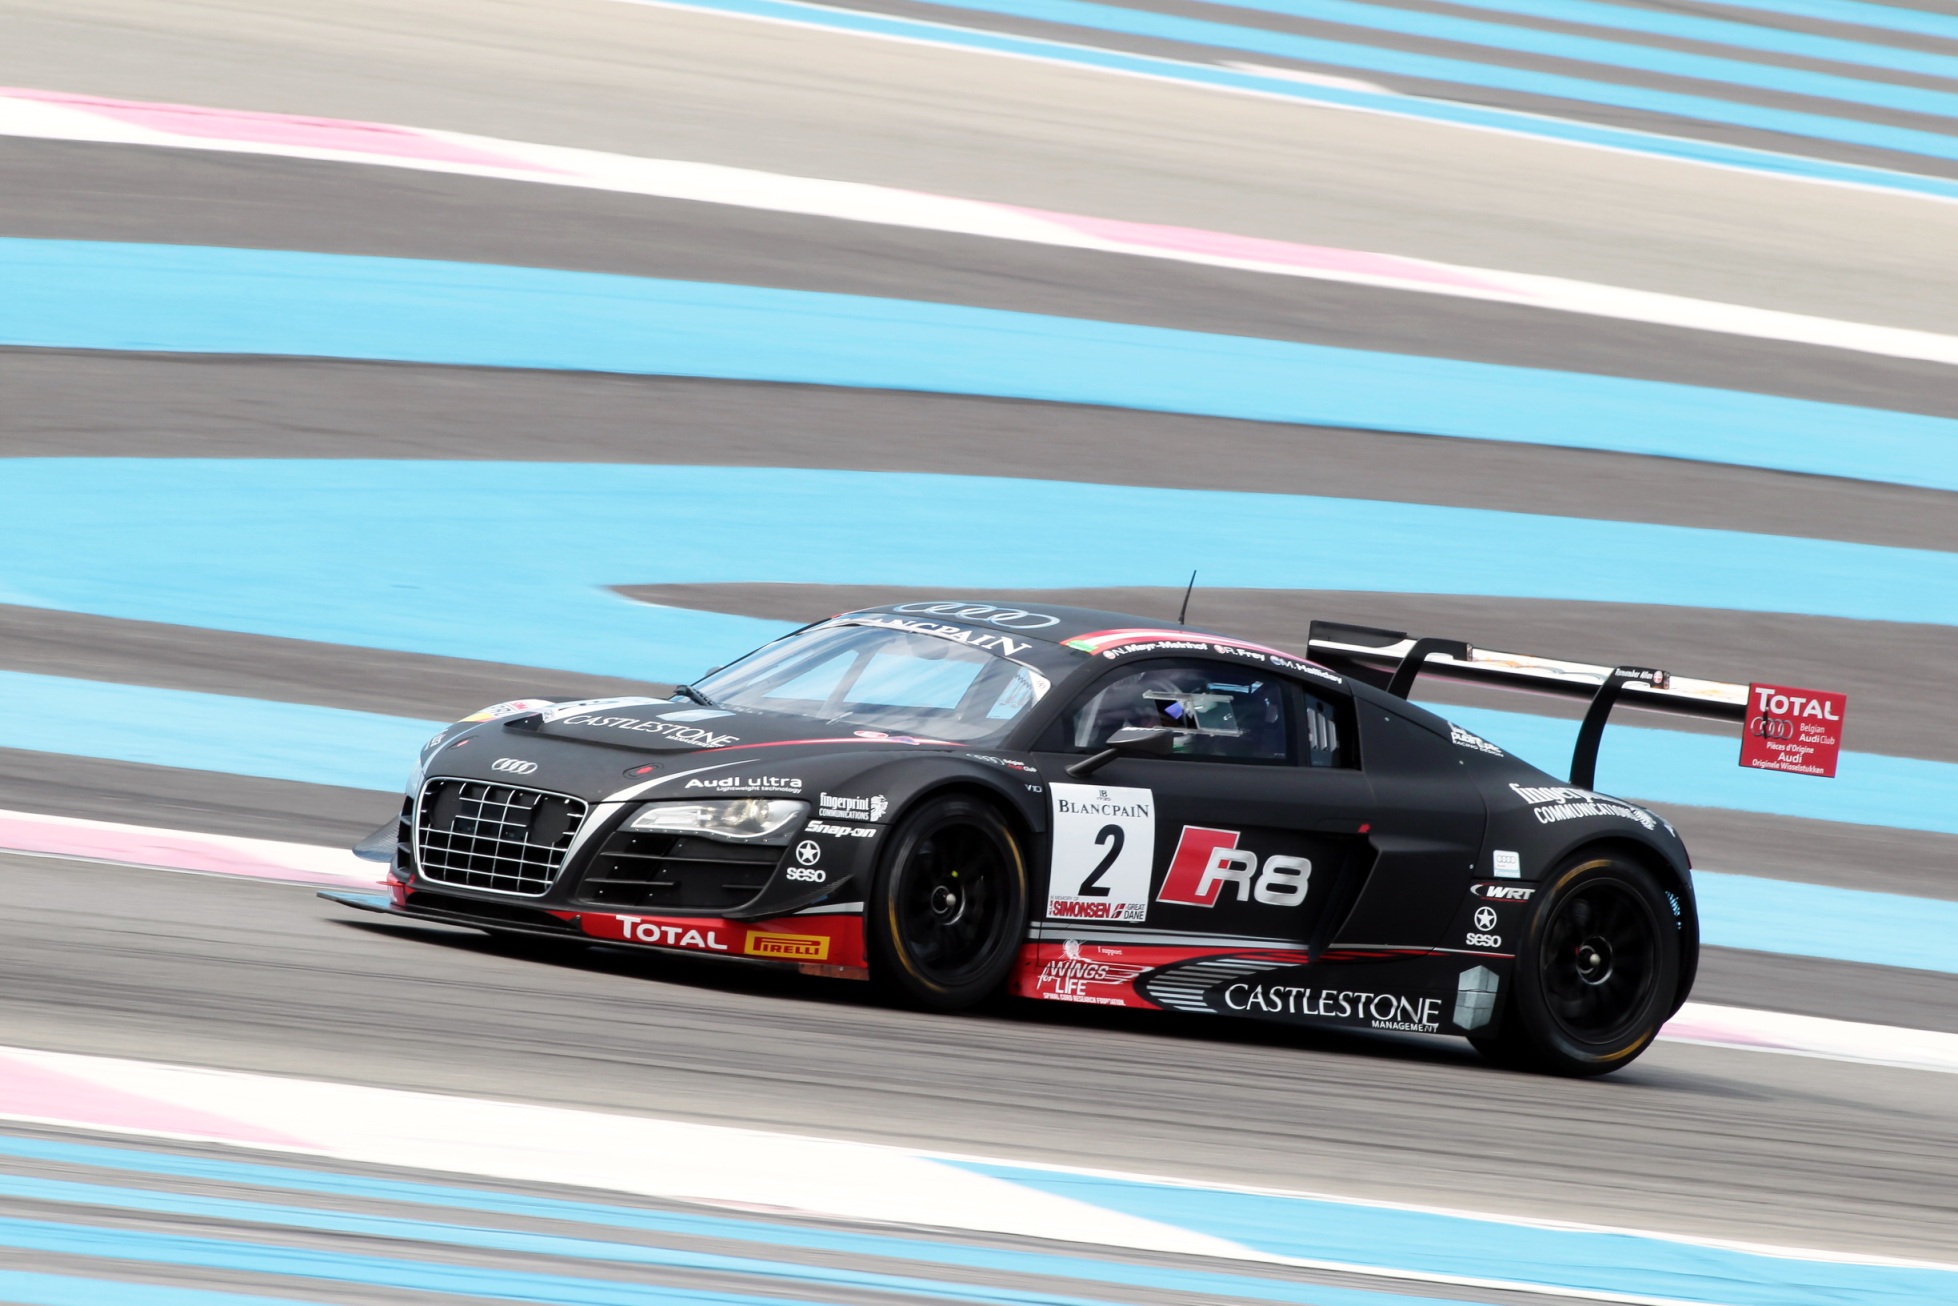 Halliday struggles to 21st in Blancpain at Paul Ricard